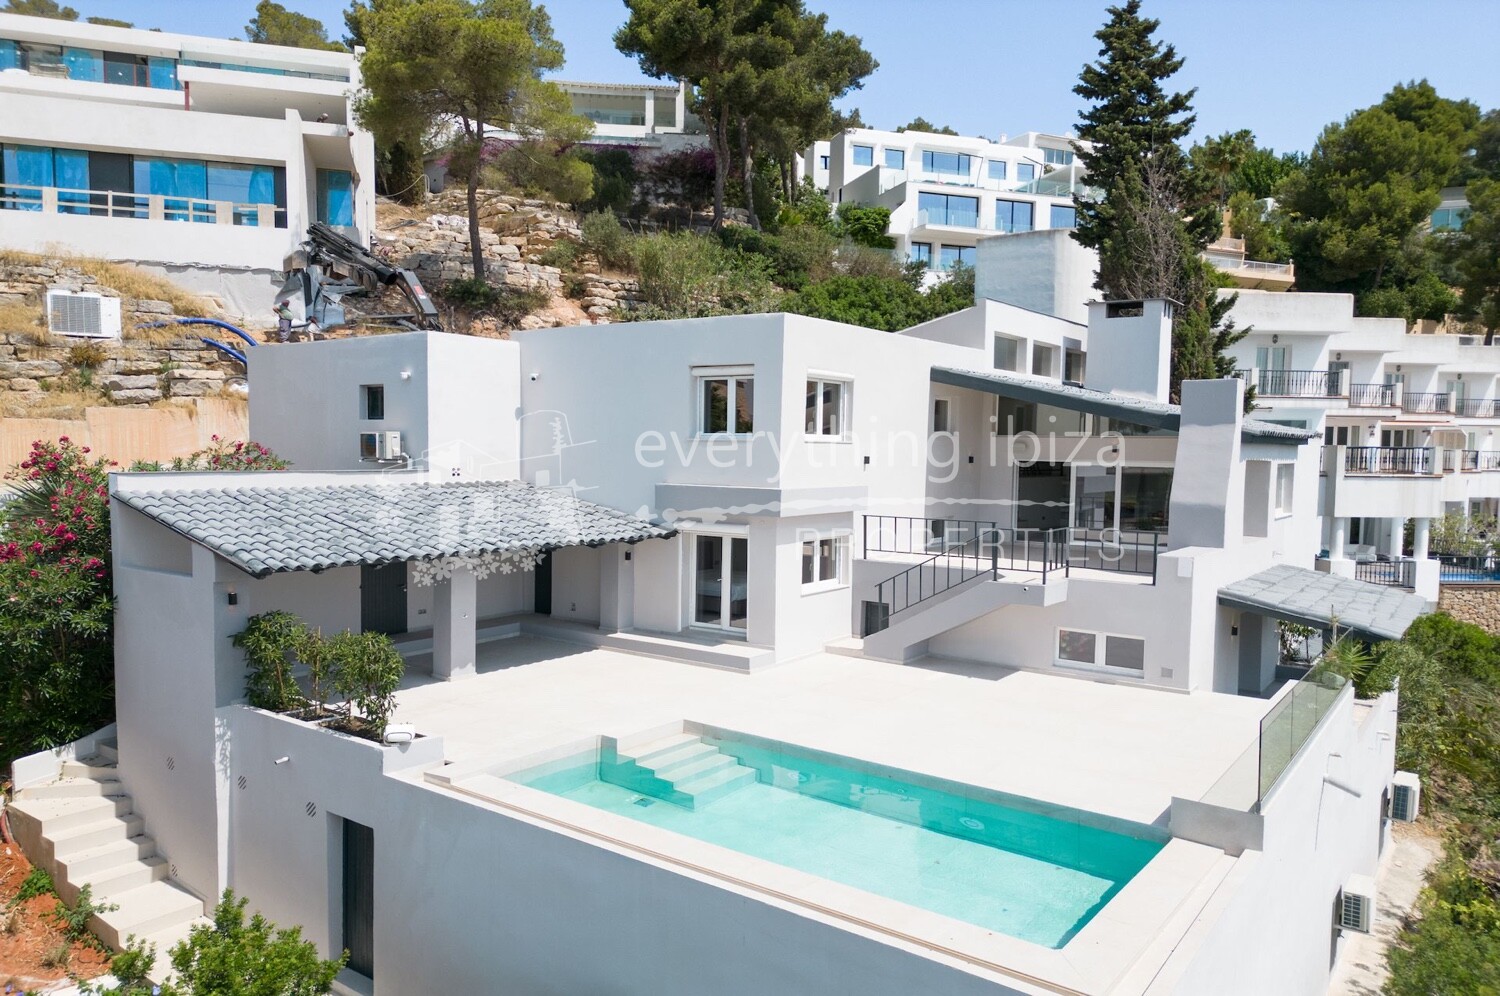 Newly Built Detached Villa of the Finest Quality with Tourist License, ref. 1627, for sale in Ibiza by everything ibiza Properties